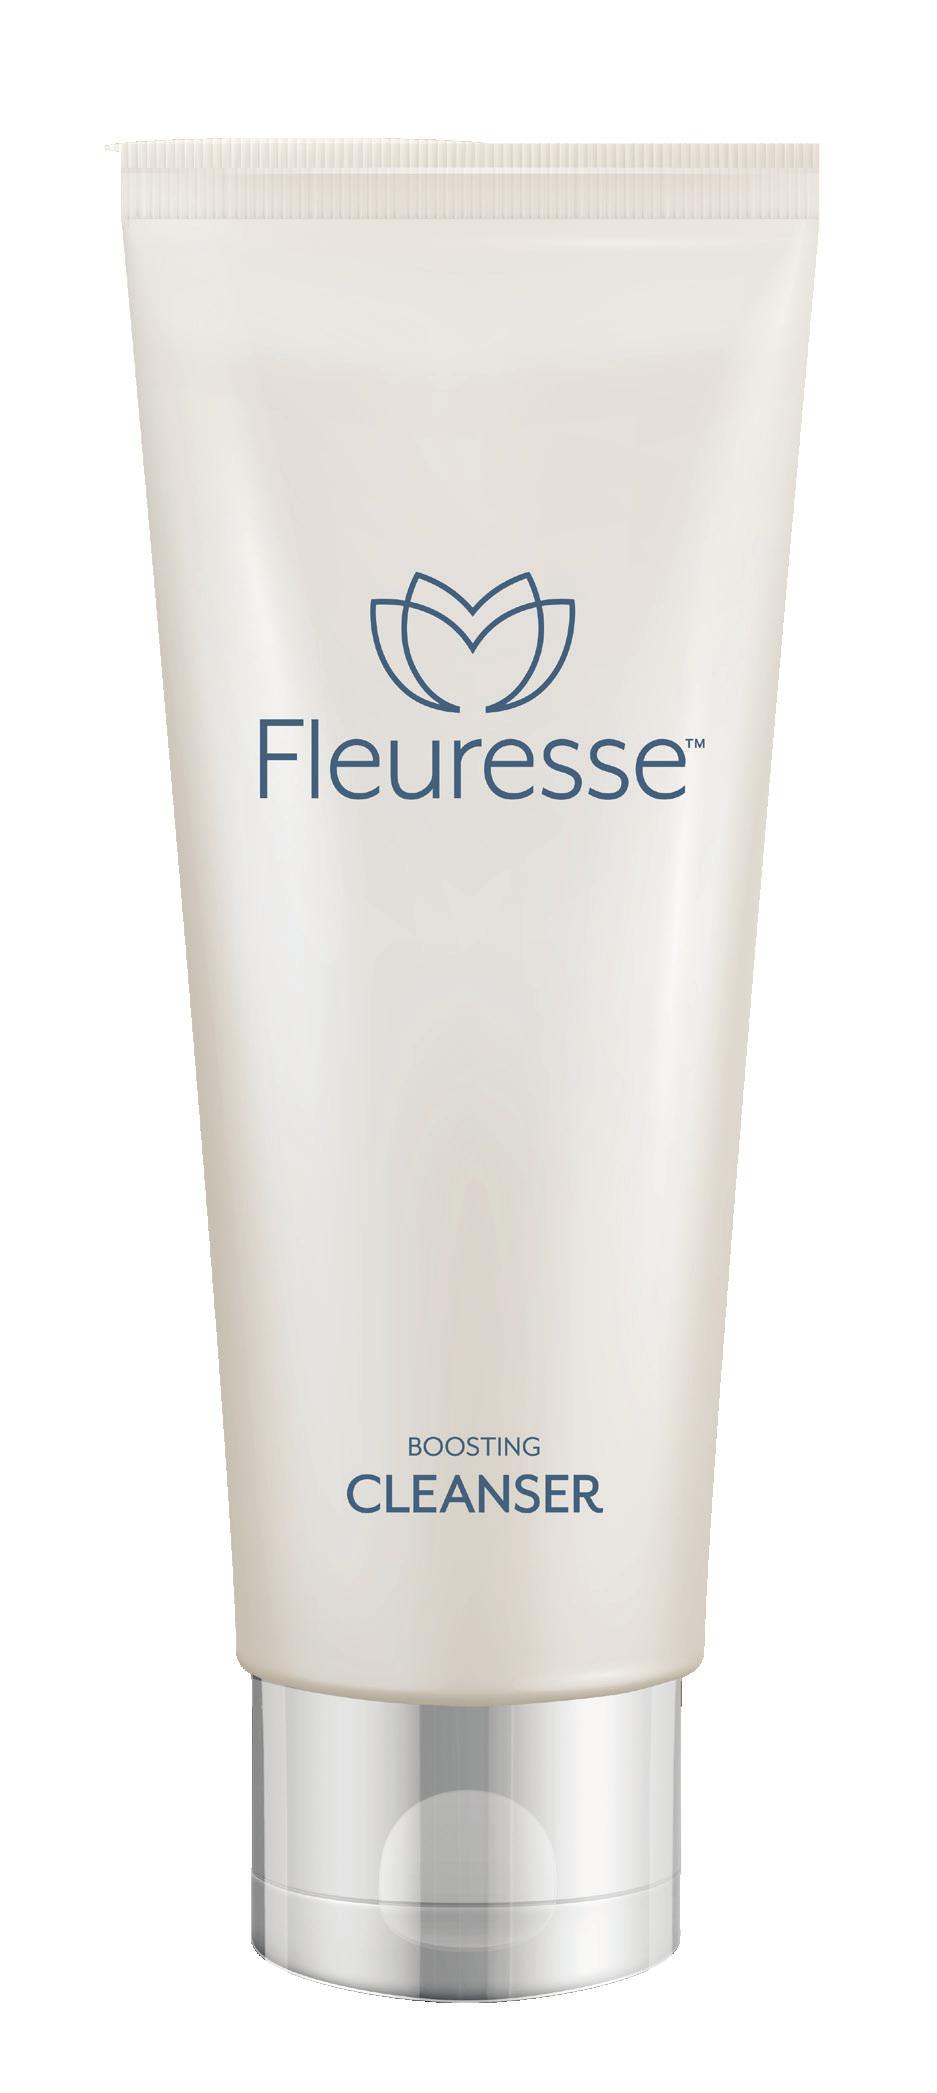 BOOSTING CLEANSER Fleuresse Boosting Cleanser employs natural botanicals to clean your skin, open your pores, and enable your skin to absorb a rich infusion of vitamins, antioxidants, and amino